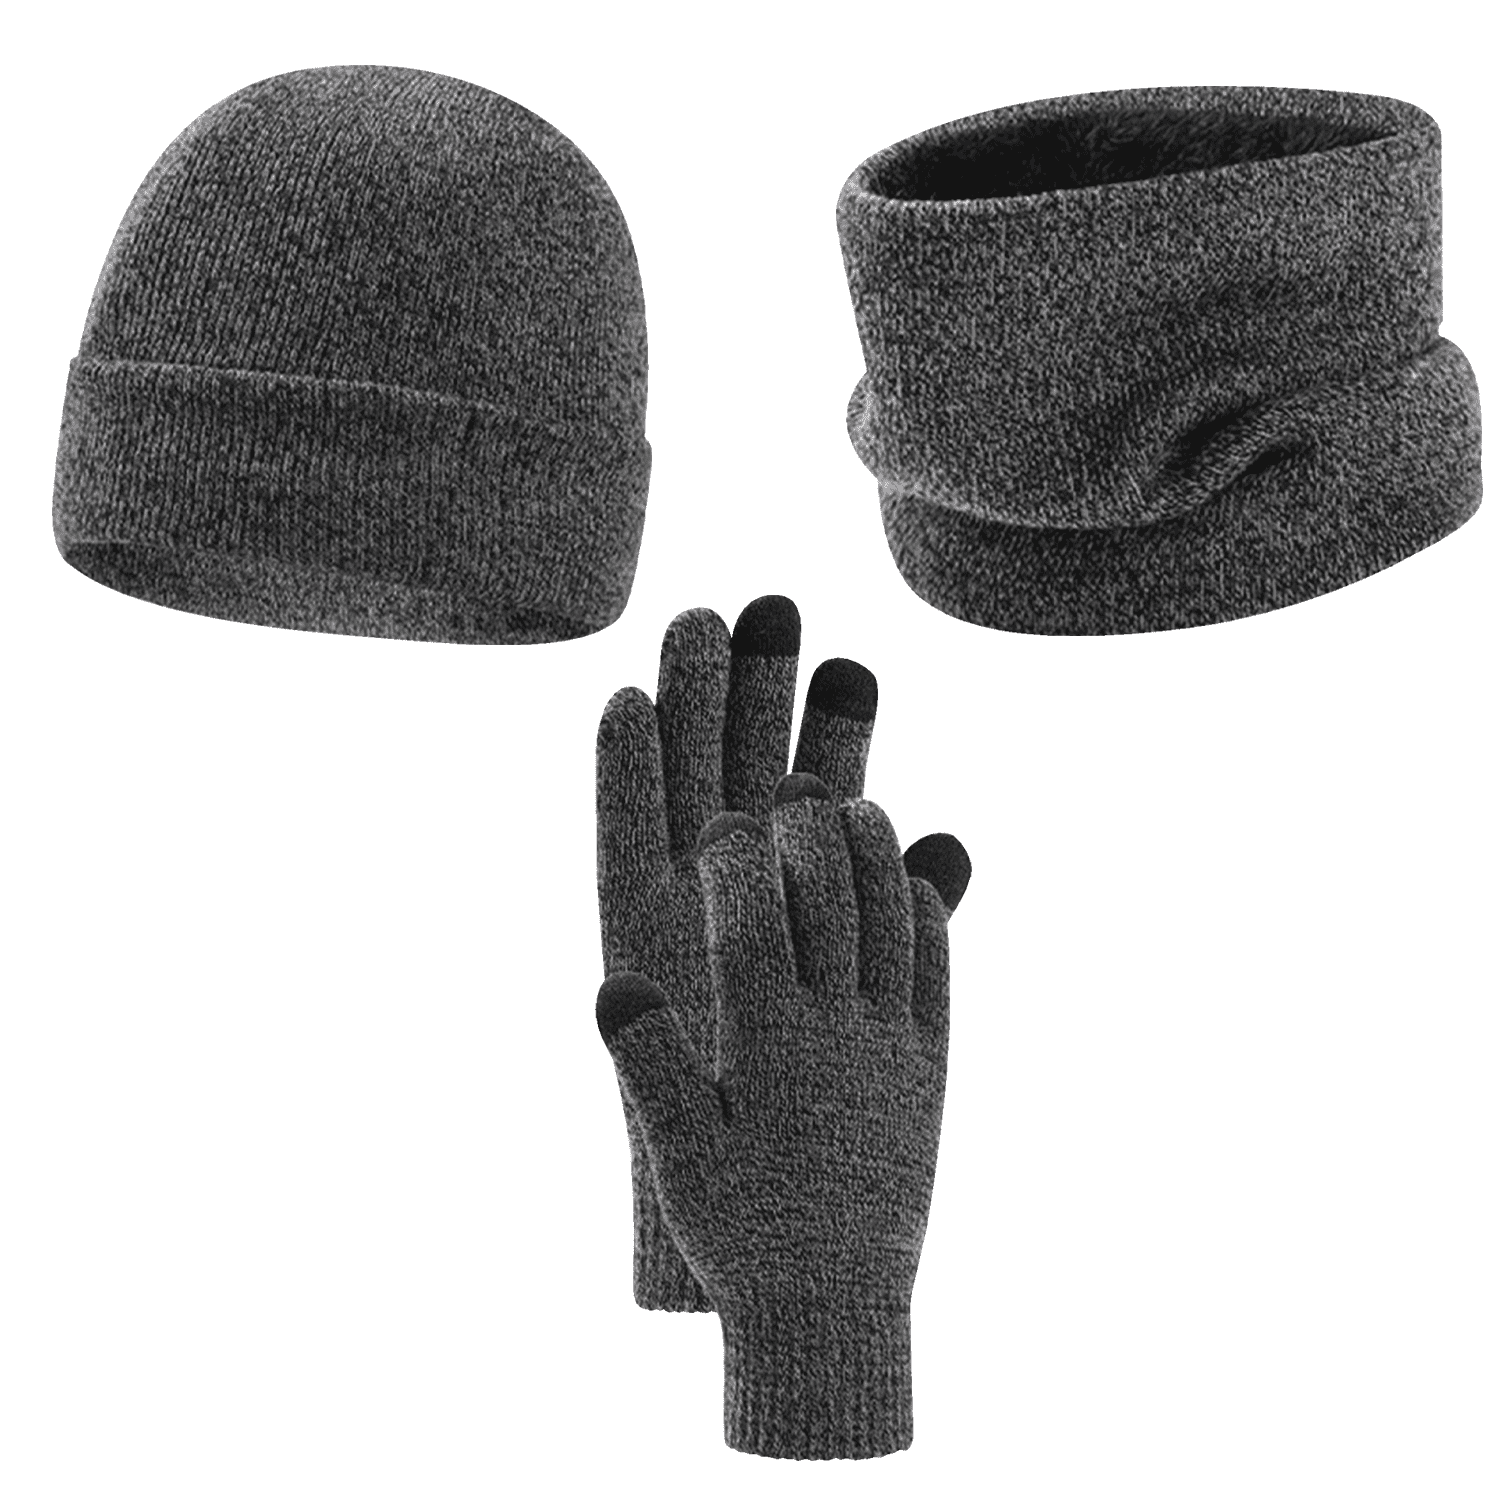 Mens Womens Winter Knit Warm Beanie Hat and Scarf and Touch Screen Gloves Set